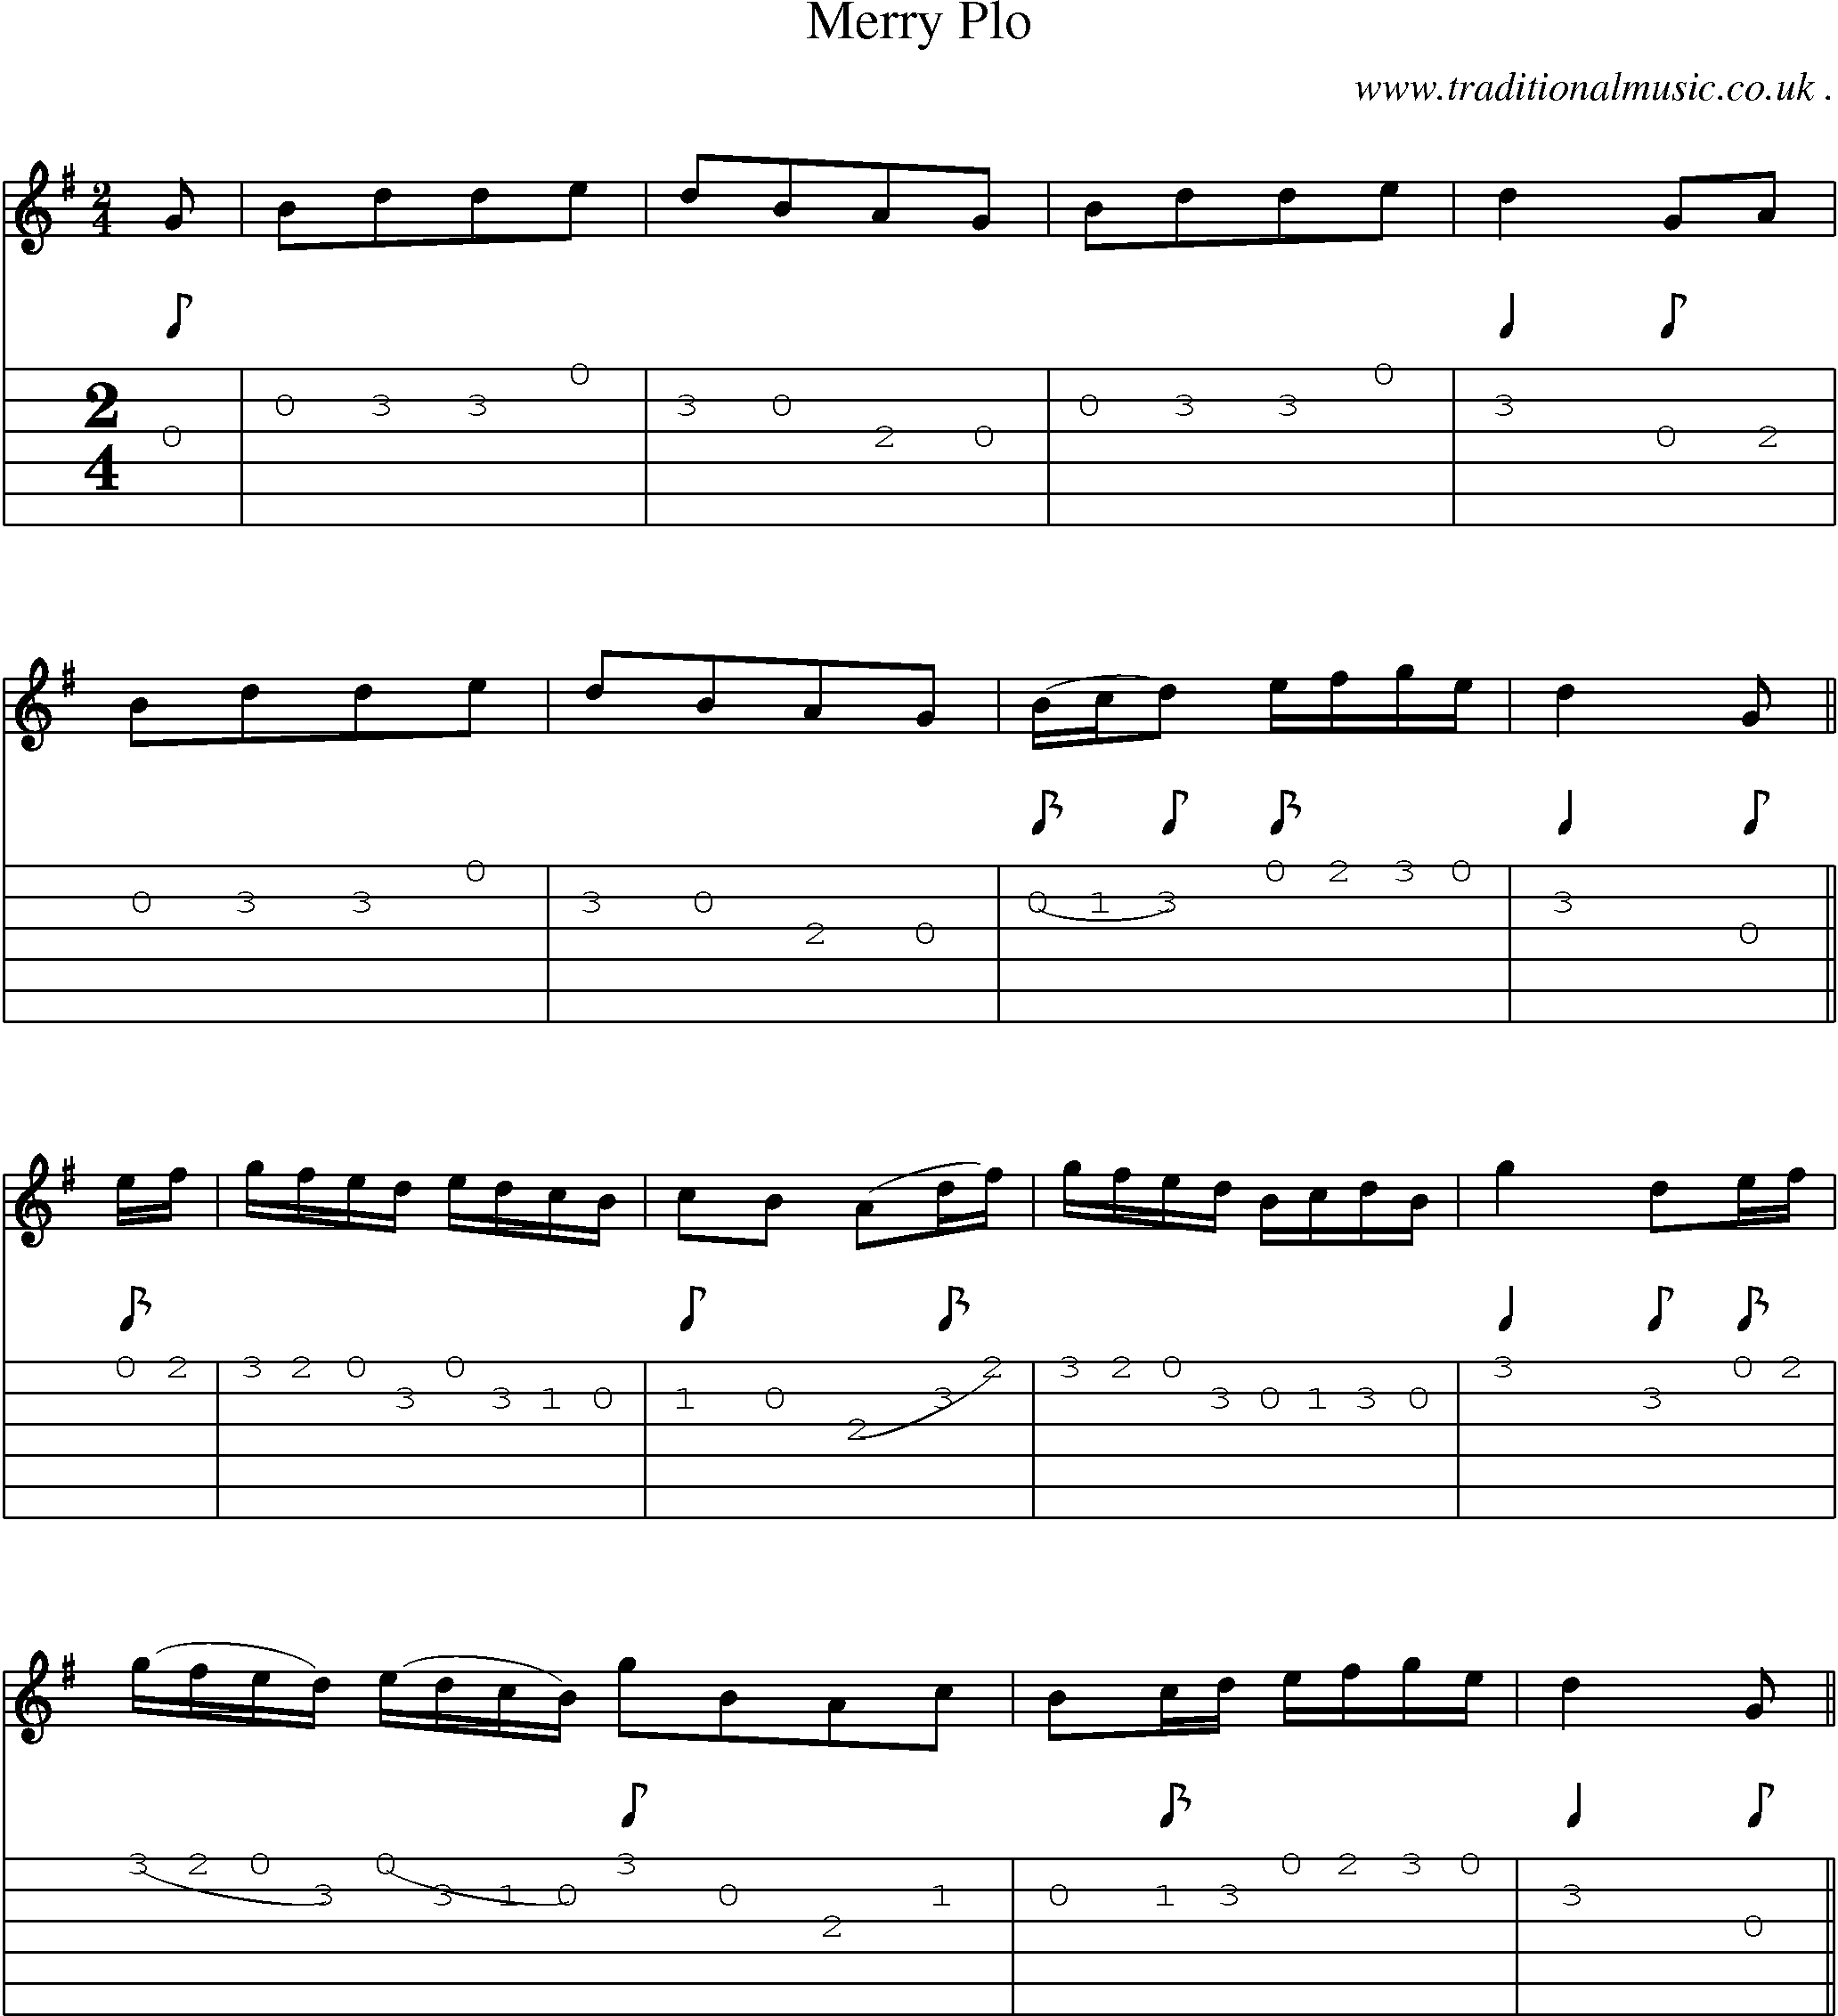 Sheet-Music and Guitar Tabs for Merry Plo